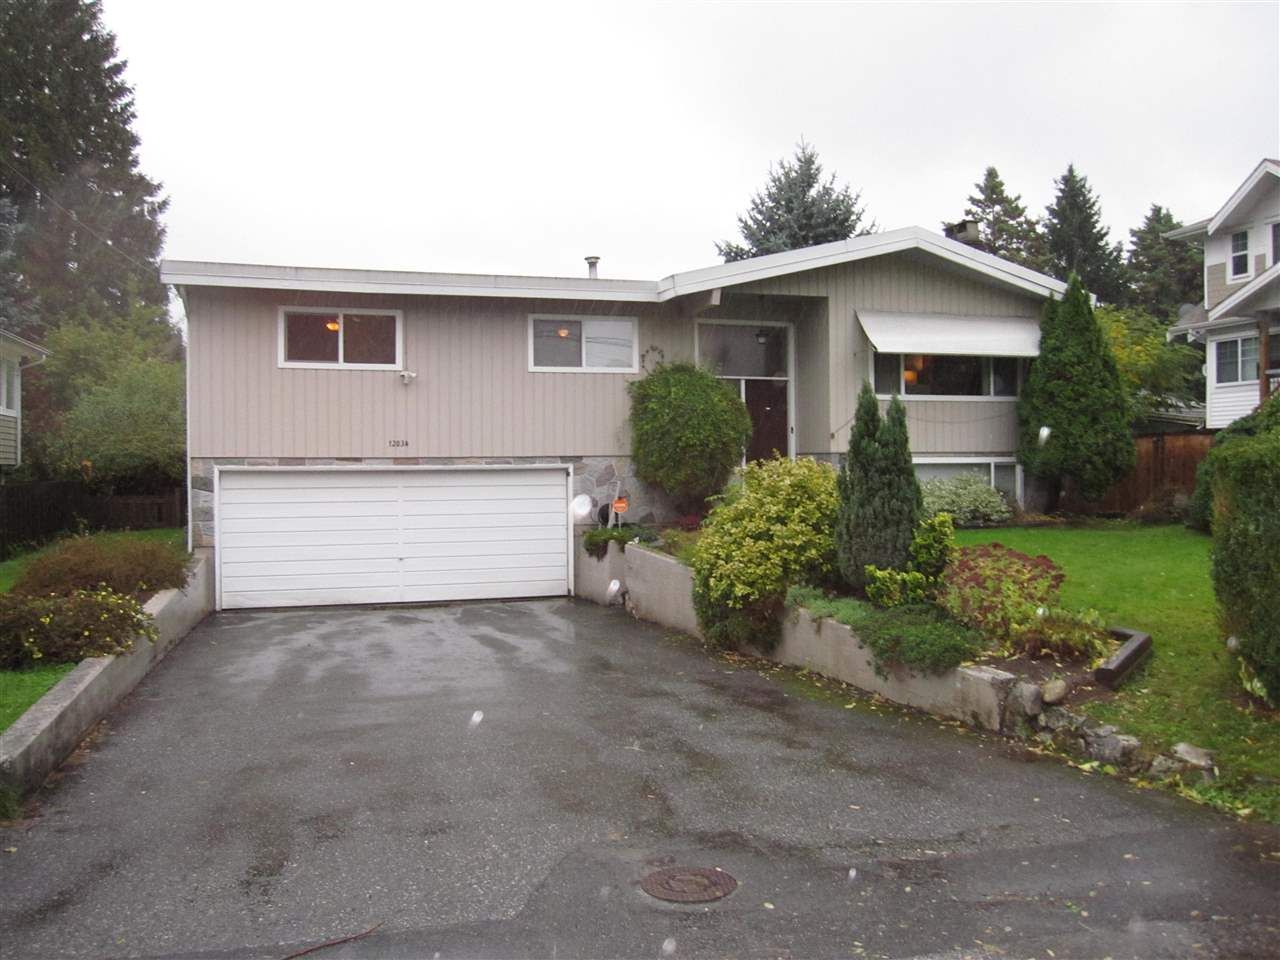 Main Photo: 12034 YORK Street in Maple Ridge: West Central House for sale : MLS®# R2215853